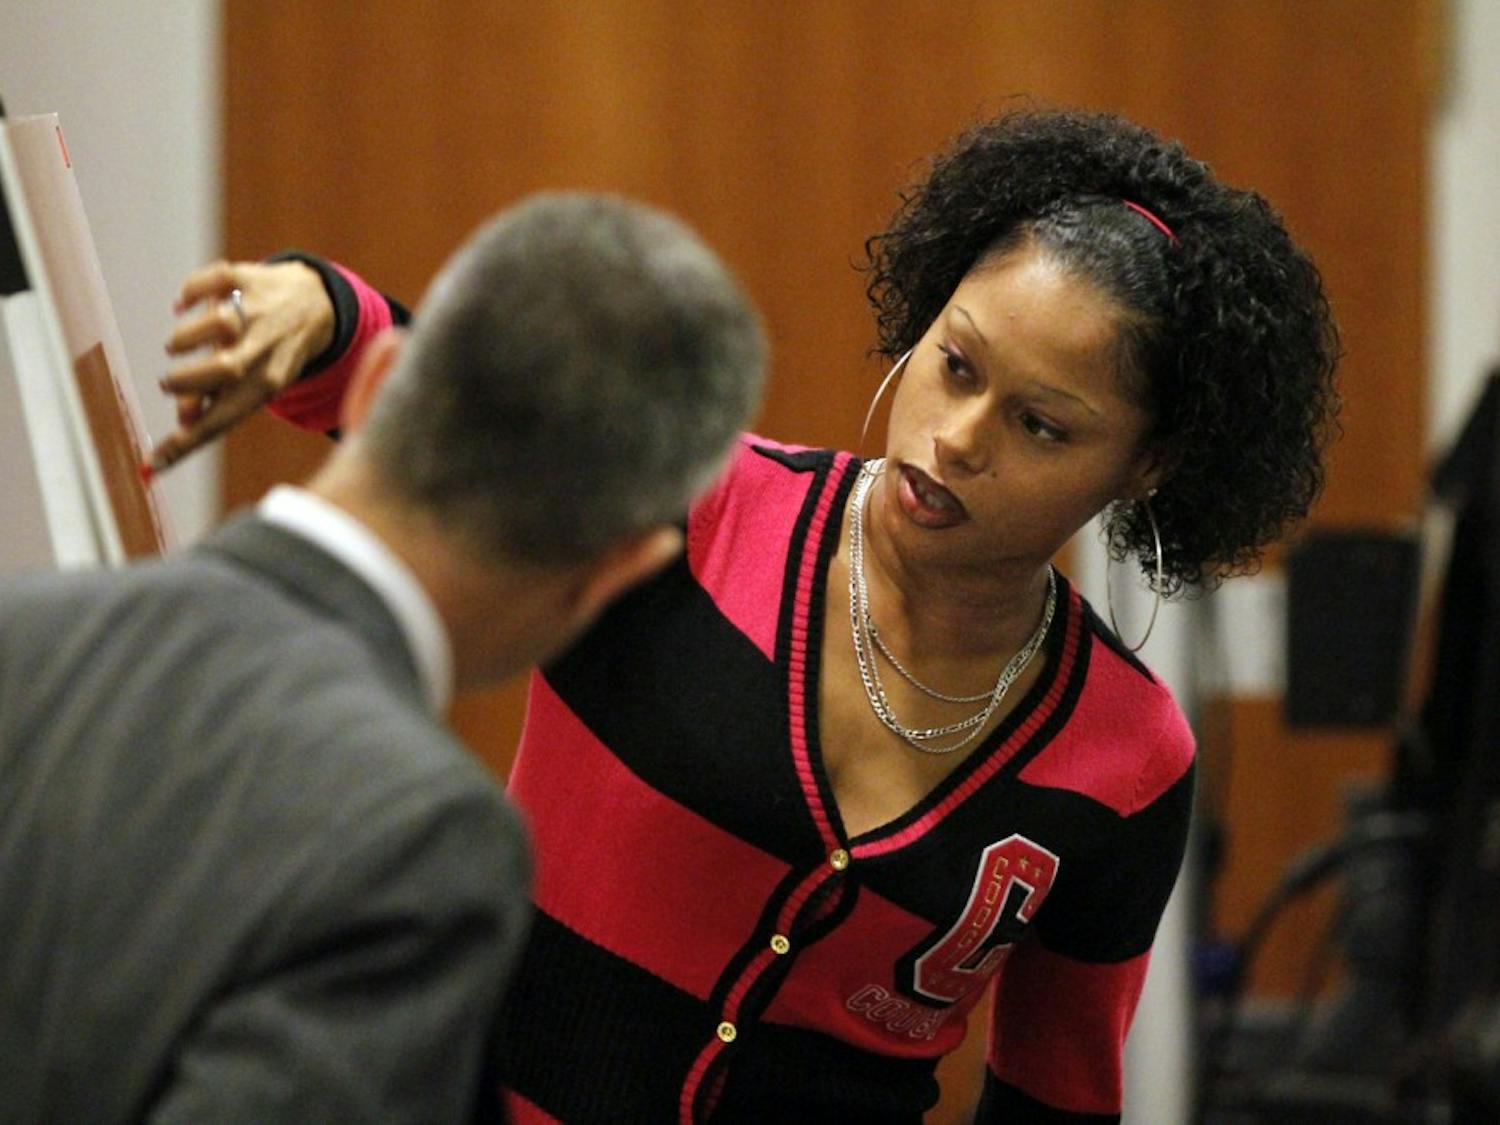 With the assistance of Orange DA James Woodall, Jr, left, prosecution witness Shanita Love, right, the former girlfriend of DeMario Atwater on Friday, Dec. 9, 2011 indicates to the Lovette jury where on an aerial photograph of Durham, NC she witnessed defendant Laurence Alvin Lovette, 21, dispose of three pieces of a semi-auto pistol back in March, 2008. Love was the first witness at the start of the third day of testimony in the Lovette trial for kidnapping, robbery and murder of UNC student body president Eve Carson on March 5, 2008. 